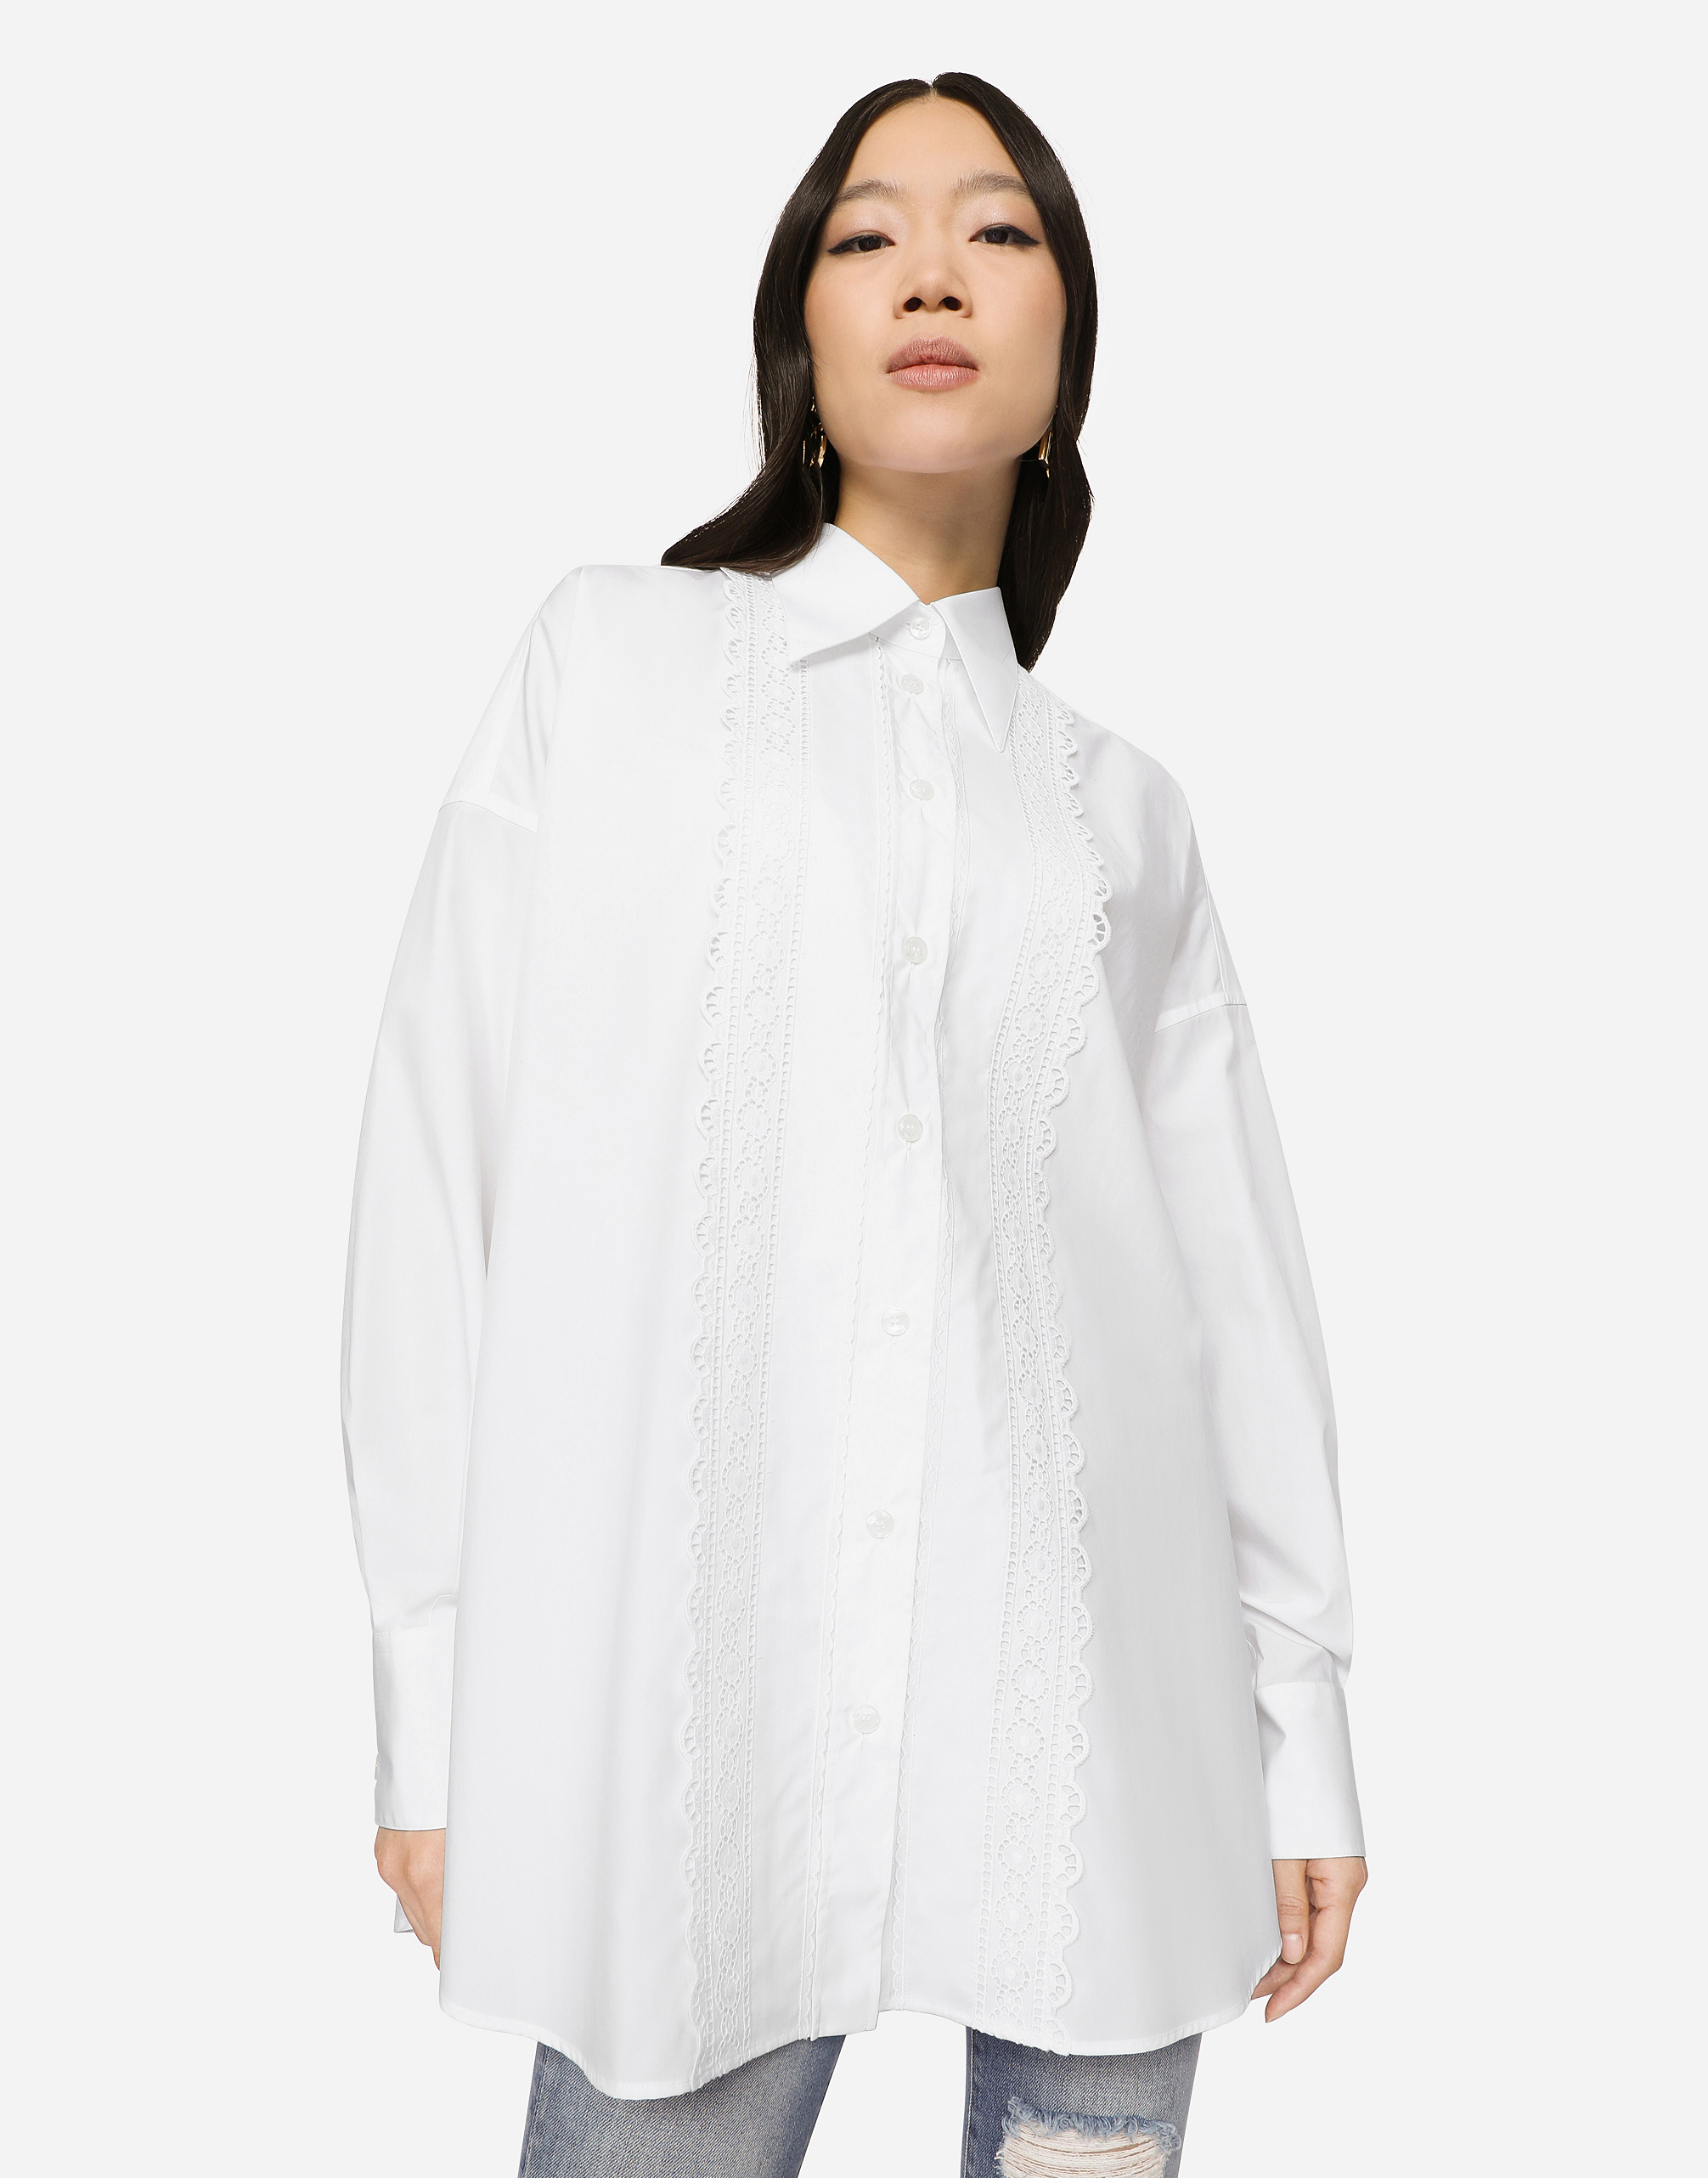 Cotton shirt with broderie anglaise detailing